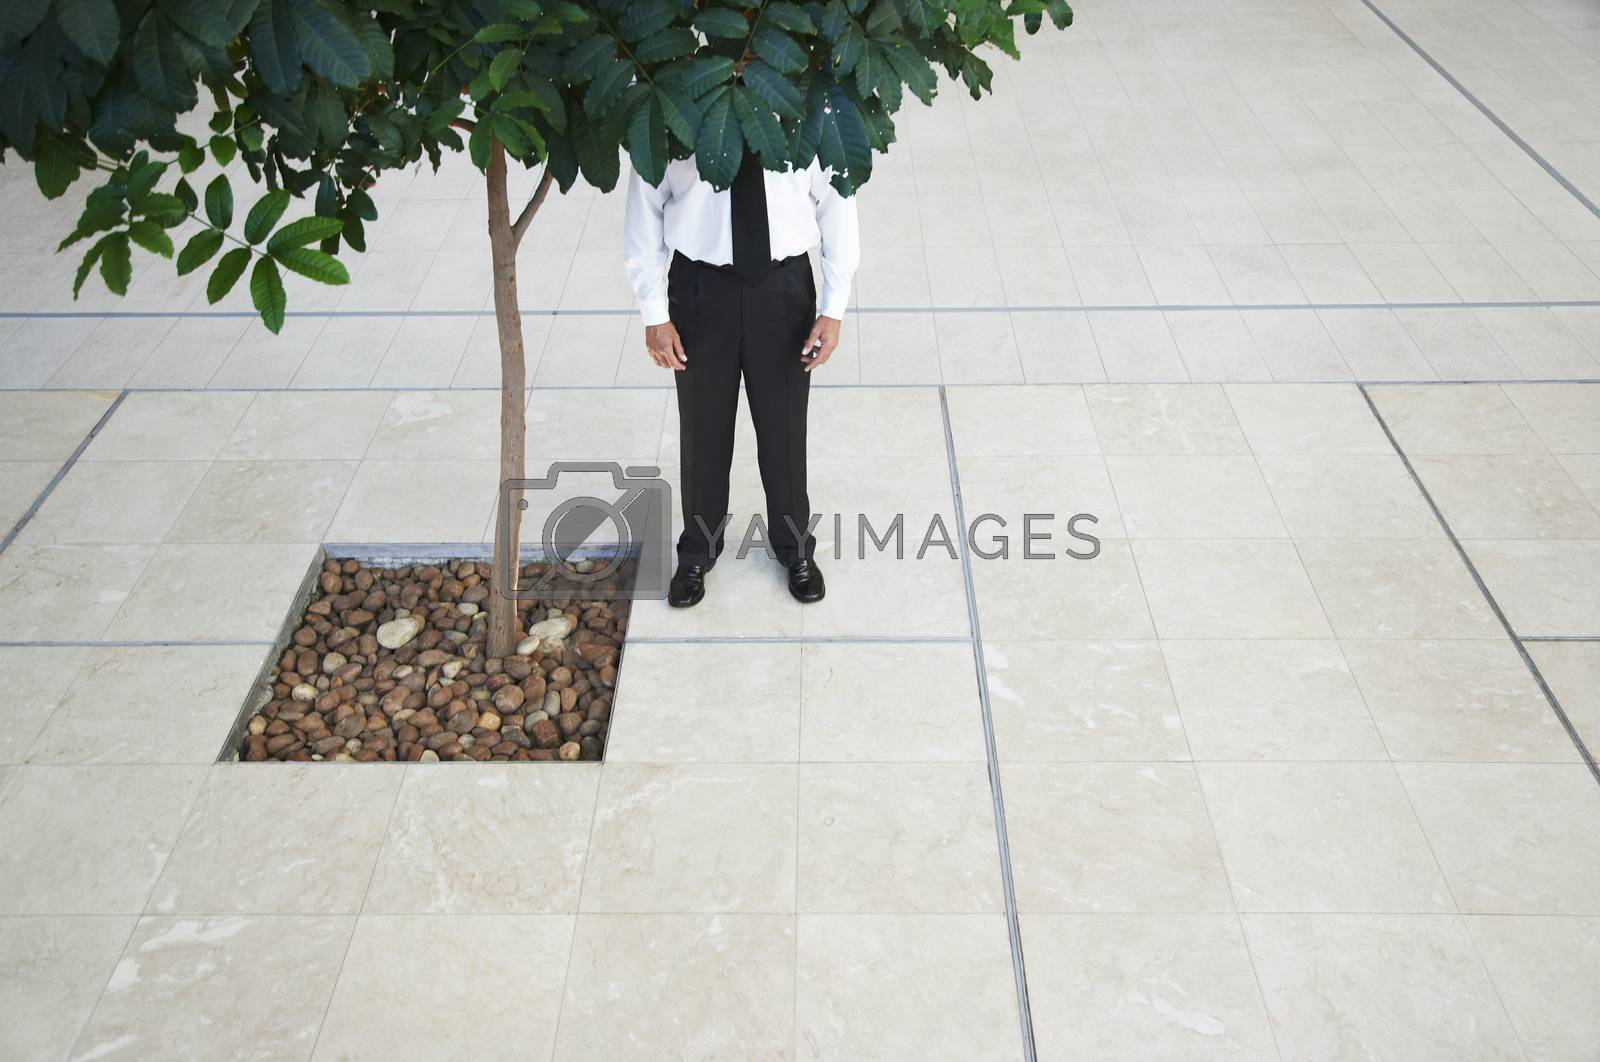 Royalty free image of Businessman standing behind tree low section by moodboard